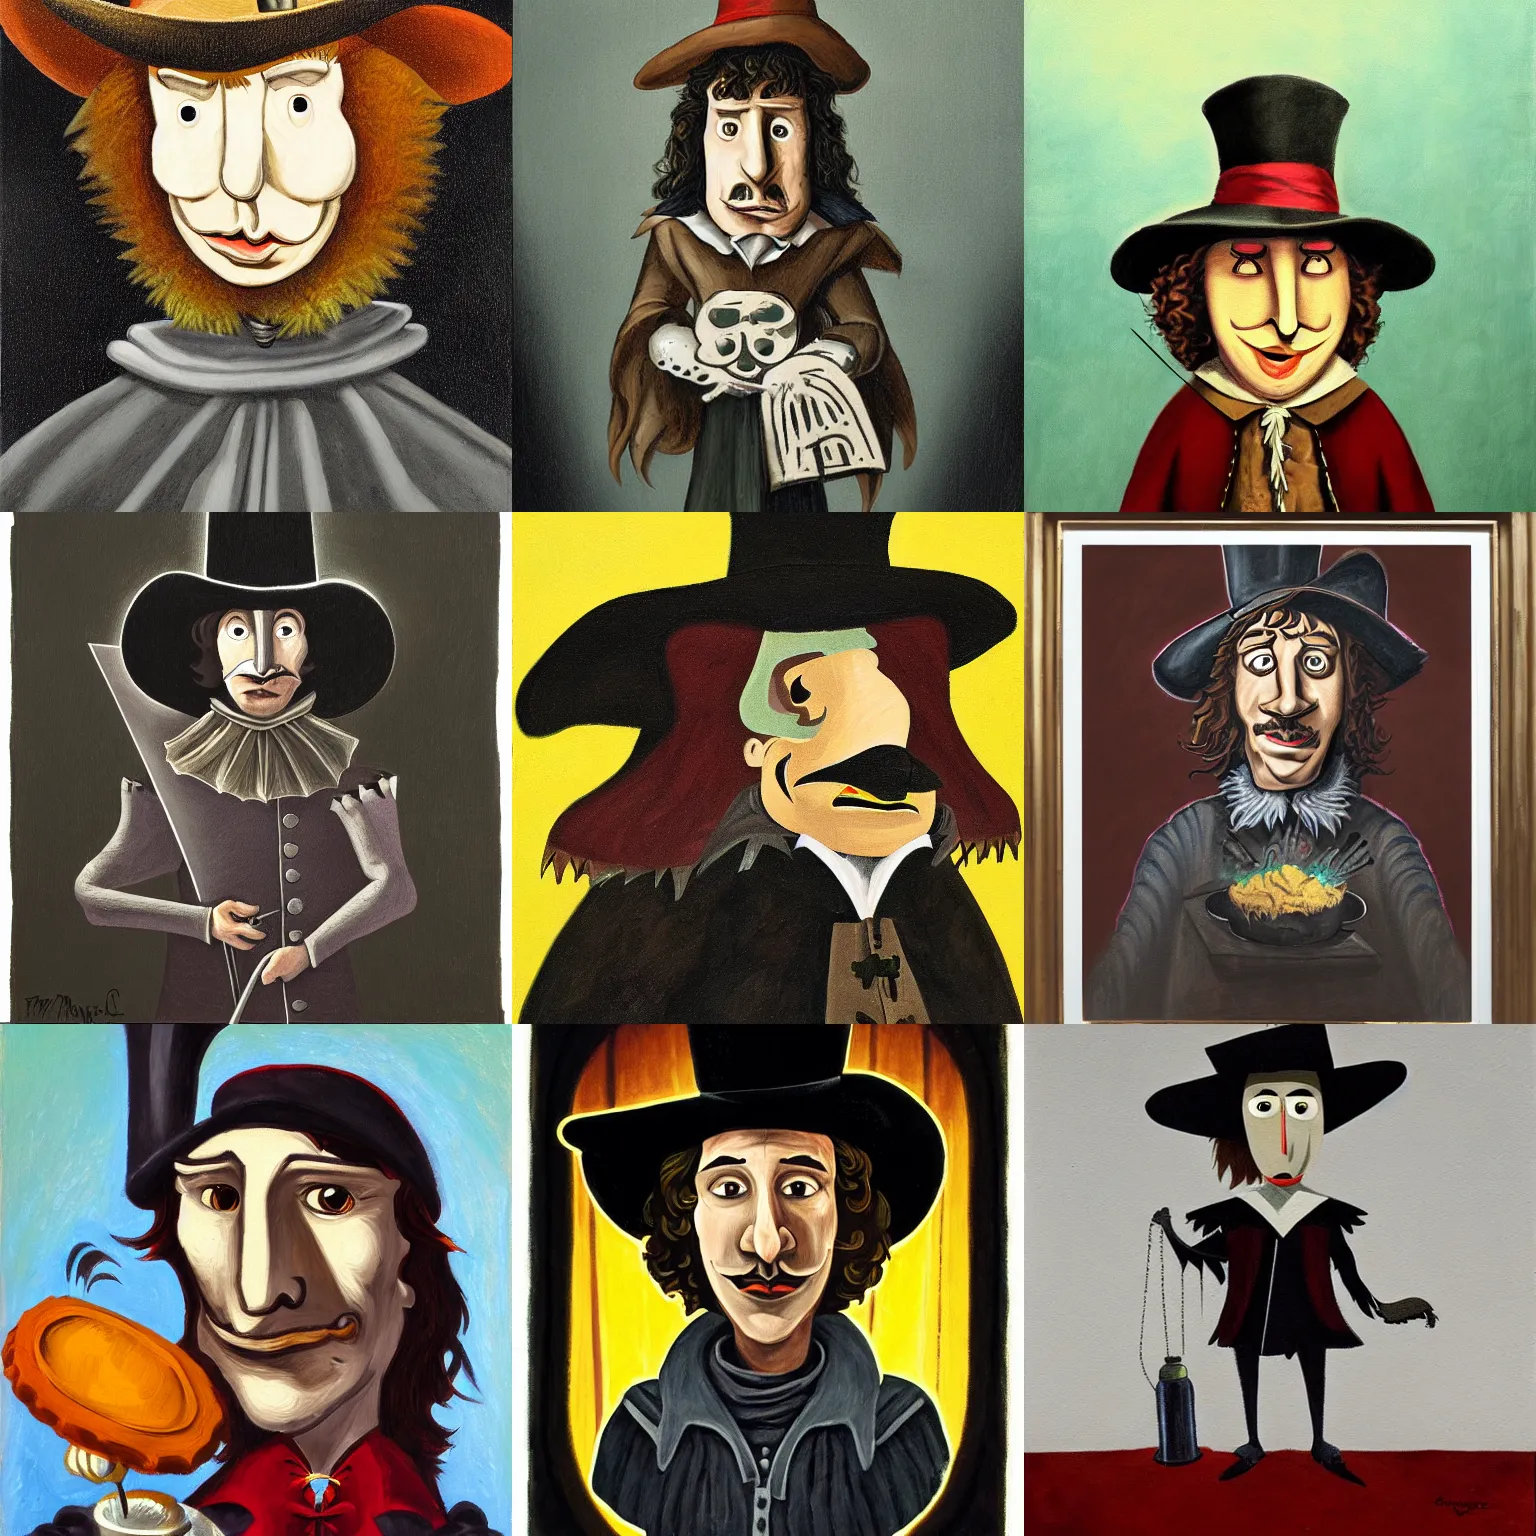 Prompt: portrait of Cyrano de Bergerac, dramatic, high contrast, theatrical, lumnious, cinematic lights, oil canvas by Patrick McHale